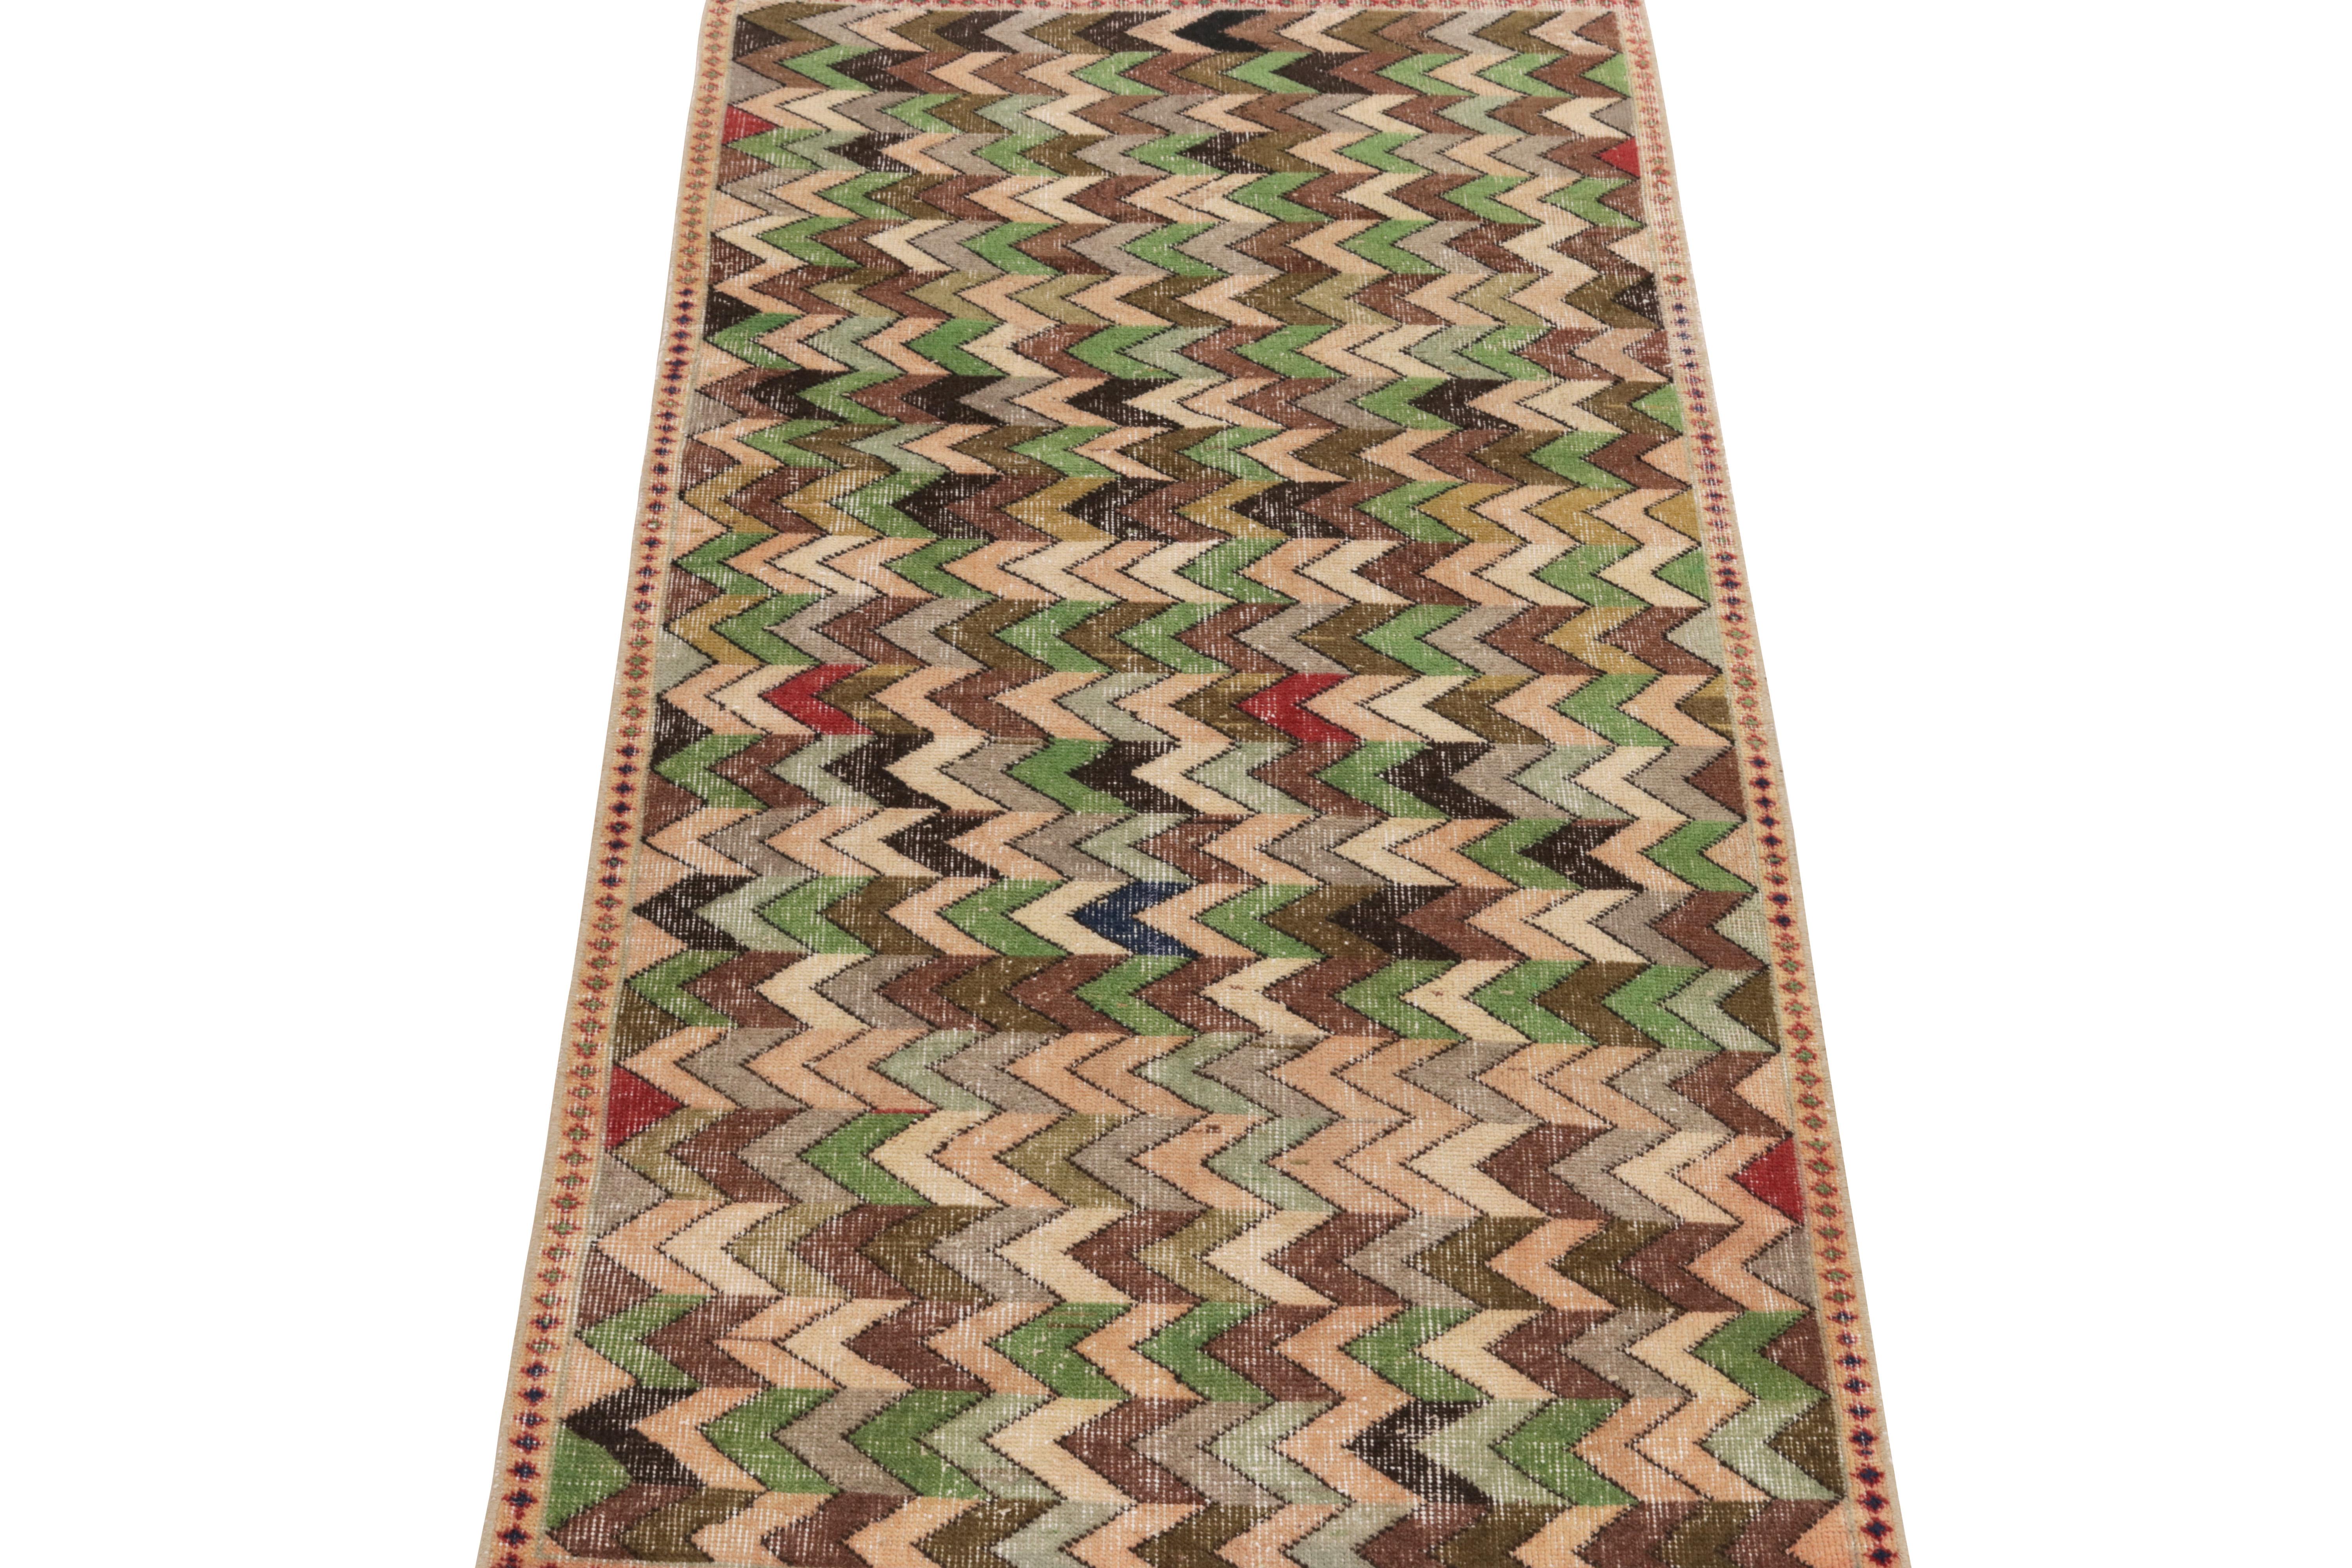 Hand-knotted in wool circa 1960-1970, a 3x6 vintage runner from a bold Turkish designer commemorated in Rug & Kilim’s Mid-Century Pasha Collection, featuring well defined chevrons in neat repetition for a gorgeous sense of movement. The pattern runs